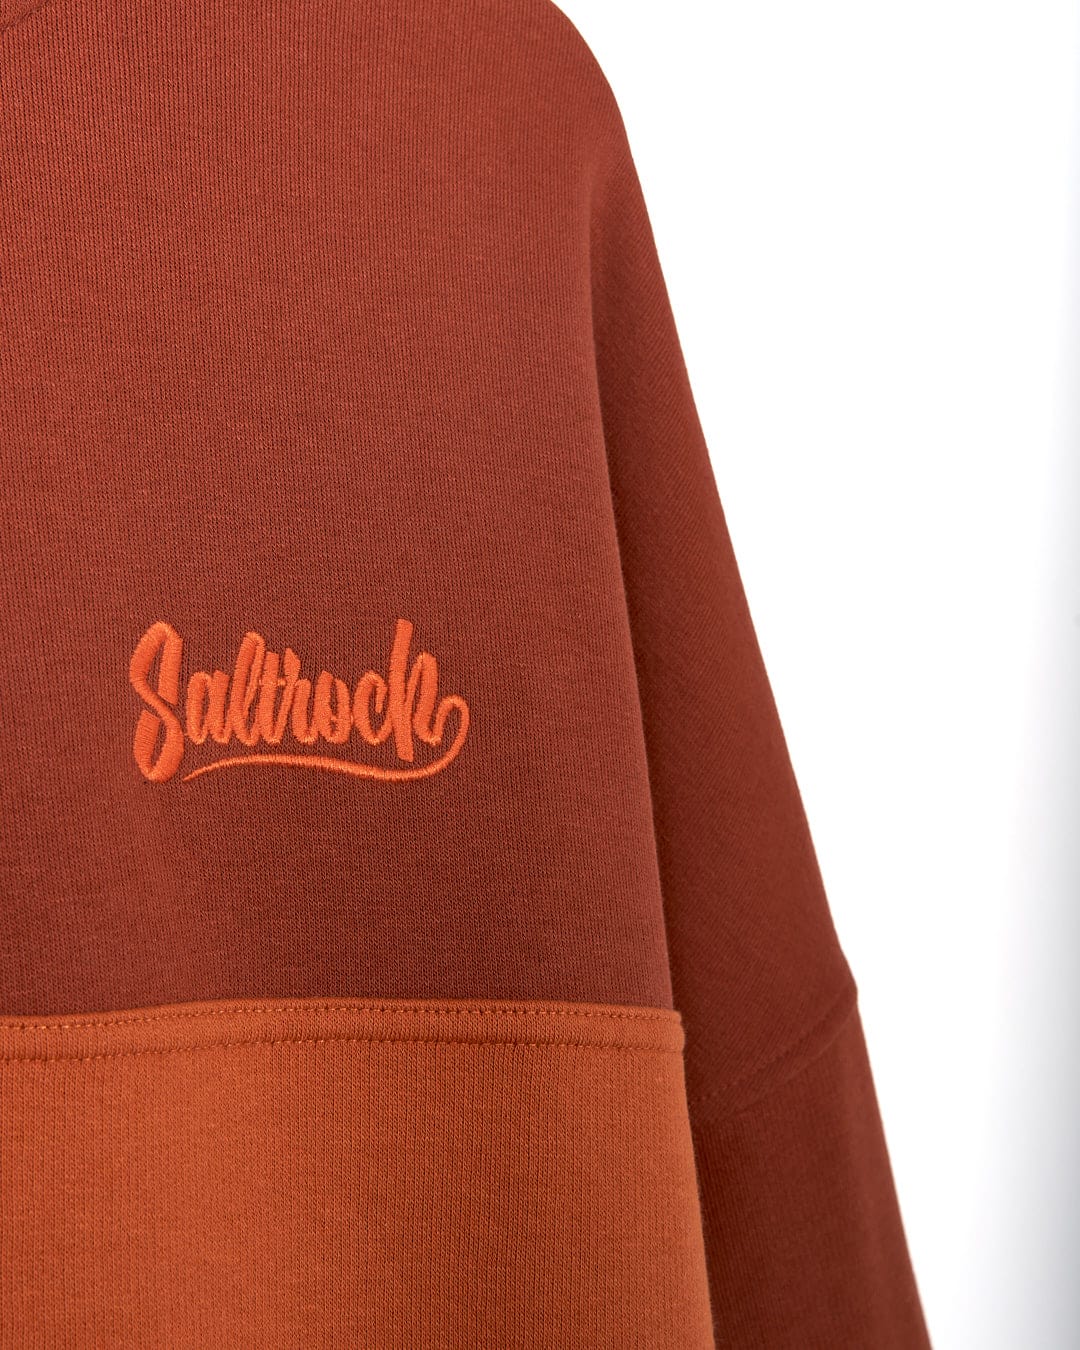 A sweatshirt with the word Speed Embroidery - Mens 1/4 Neck Zip - Red by Saltrock on it.